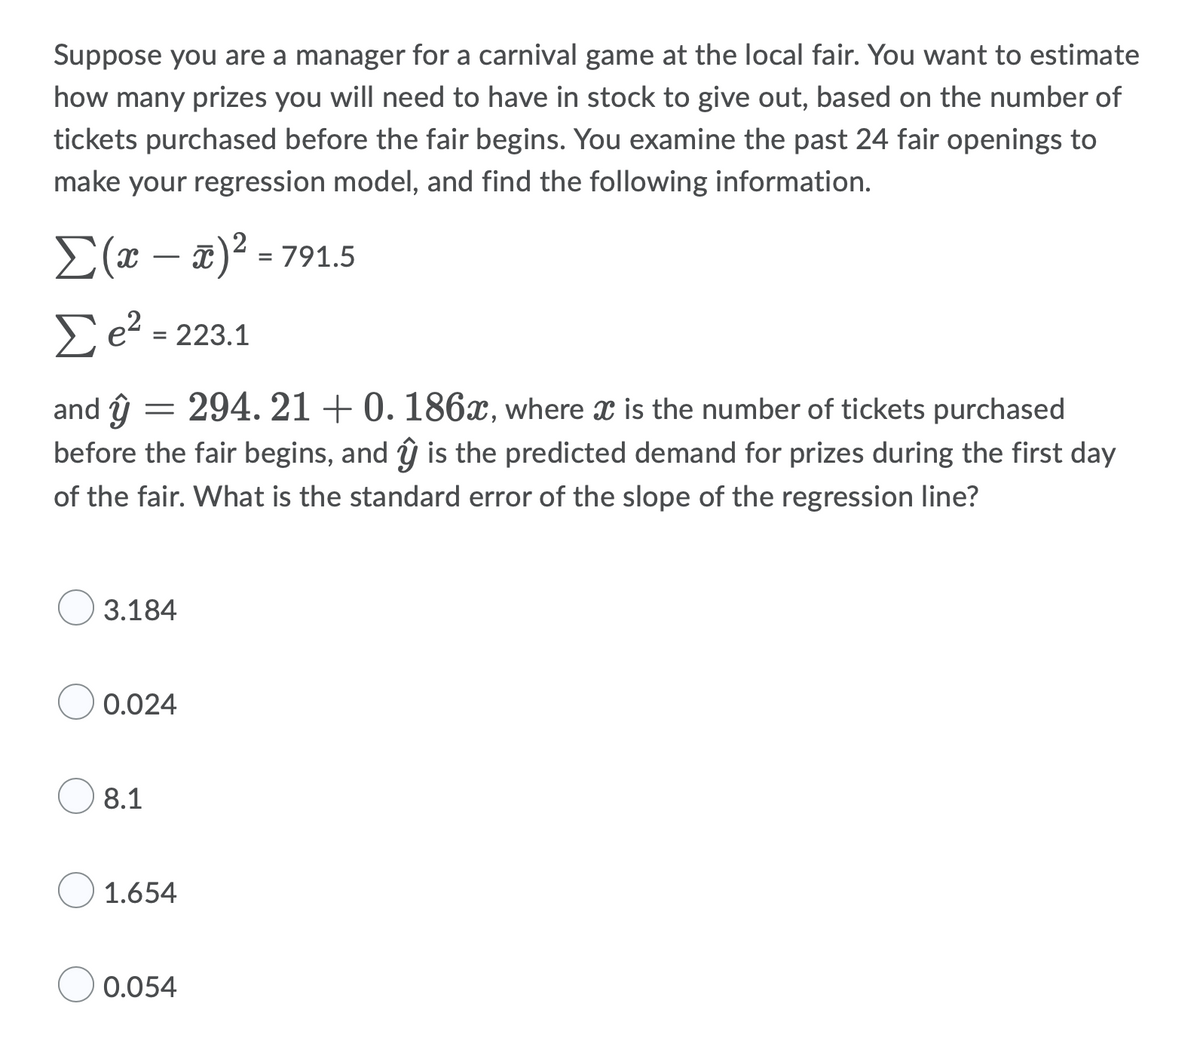 Suppose you are a manager for a carnival game at the local fair. You want to estimate
how many prizes you will need to have in stock to give out, based on the number of
tickets purchased before the fair begins. You examine the past 24 fair openings to
make your regression model, and find the following information.
Σ(x − x)² = 791.5
Σe² =
223.1
and ŷ
=
294. 21 +0. 186x, where x is the number of tickets purchased
before the fair begins, and ŷ is the predicted demand for prizes during the first day
of the fair. What is the standard error of the slope of the regression line?
3.184
0.024
8.1
1.654
0.054